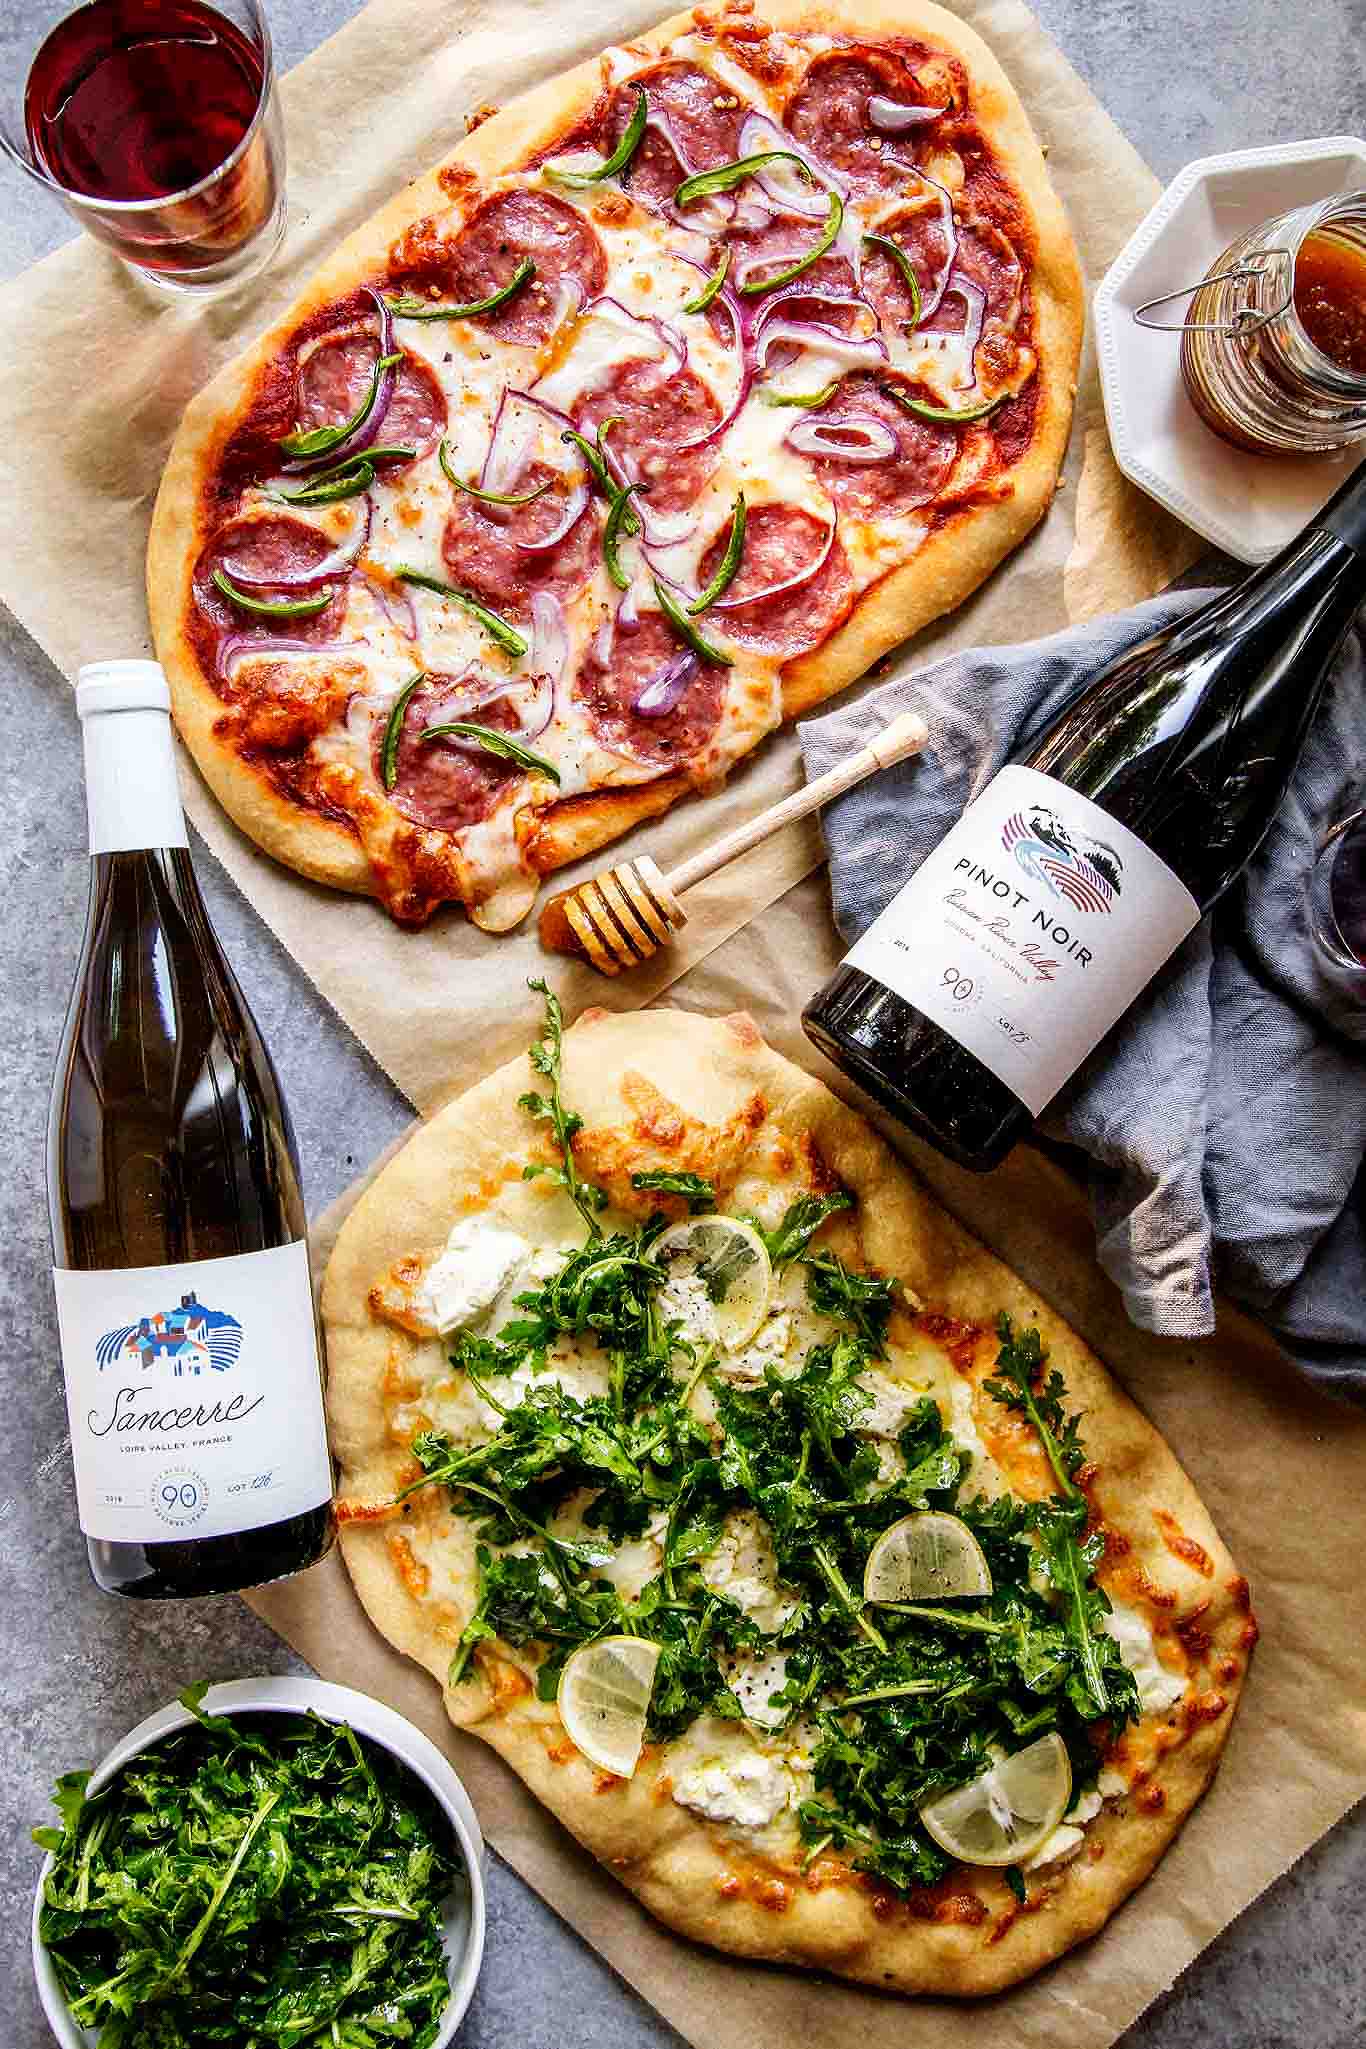 Learn how to host a wine & pizza party at home with these two simple pizza recipes. One features salami, jalapeno & honey and the other is a white pizza topped with goat cheese & arugula salad.